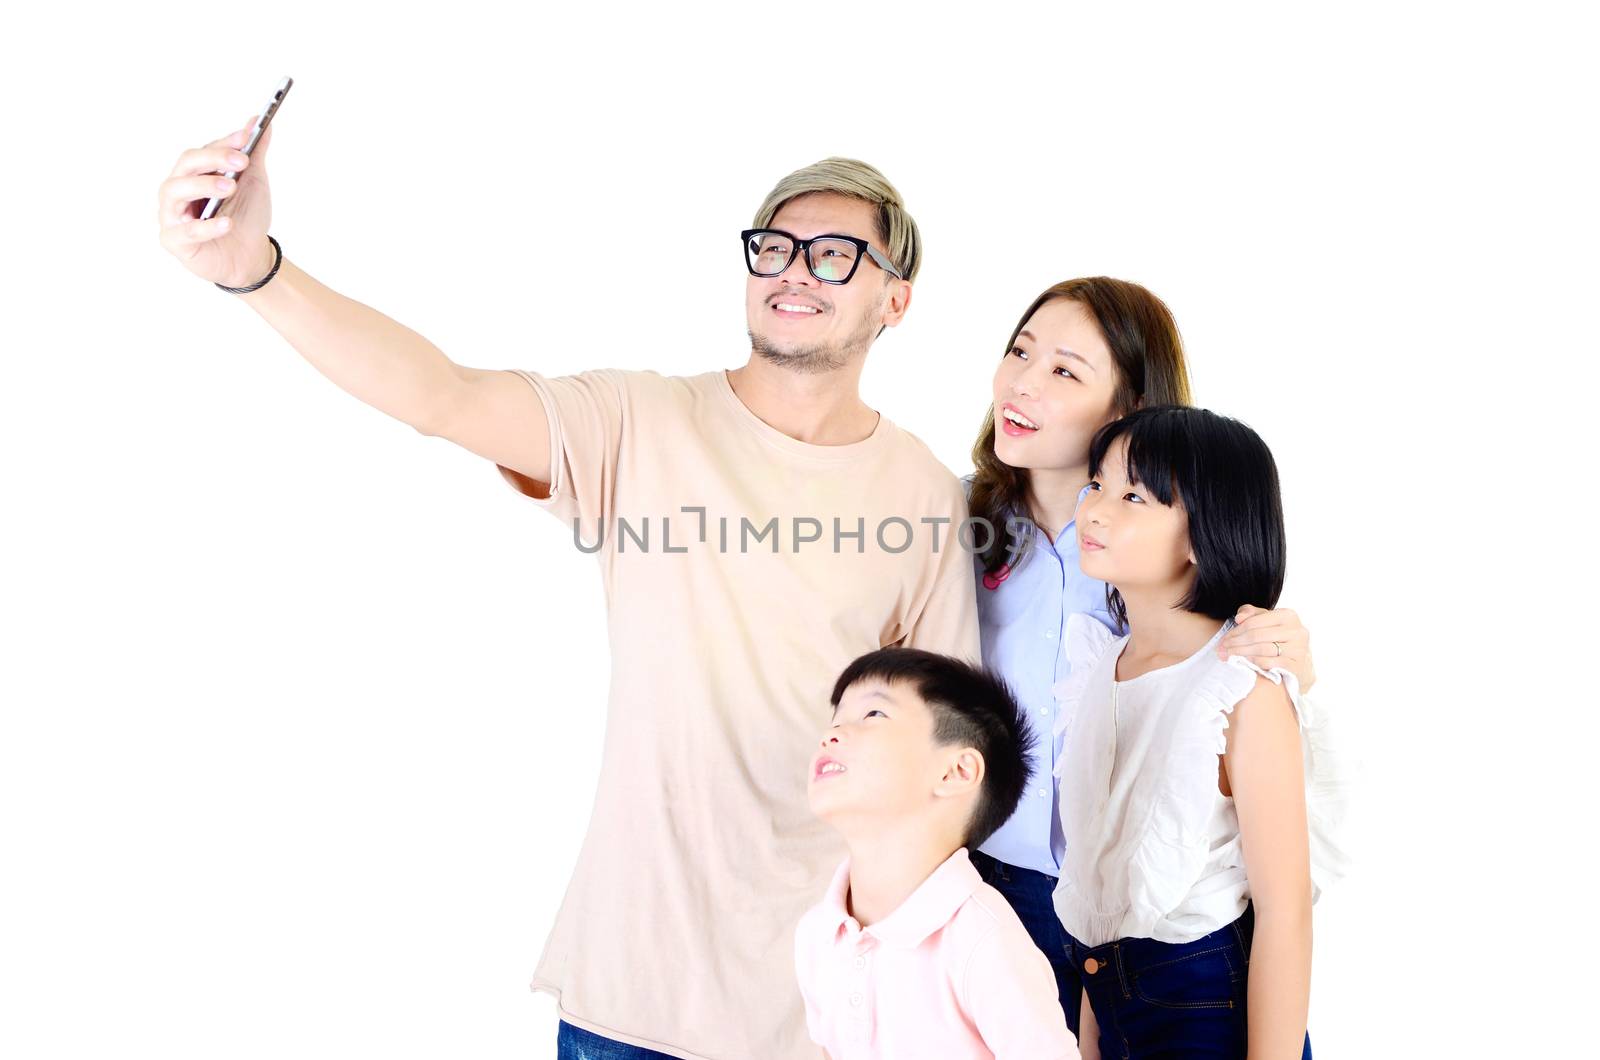 Happy family taking picture together in studio, isolated over white background